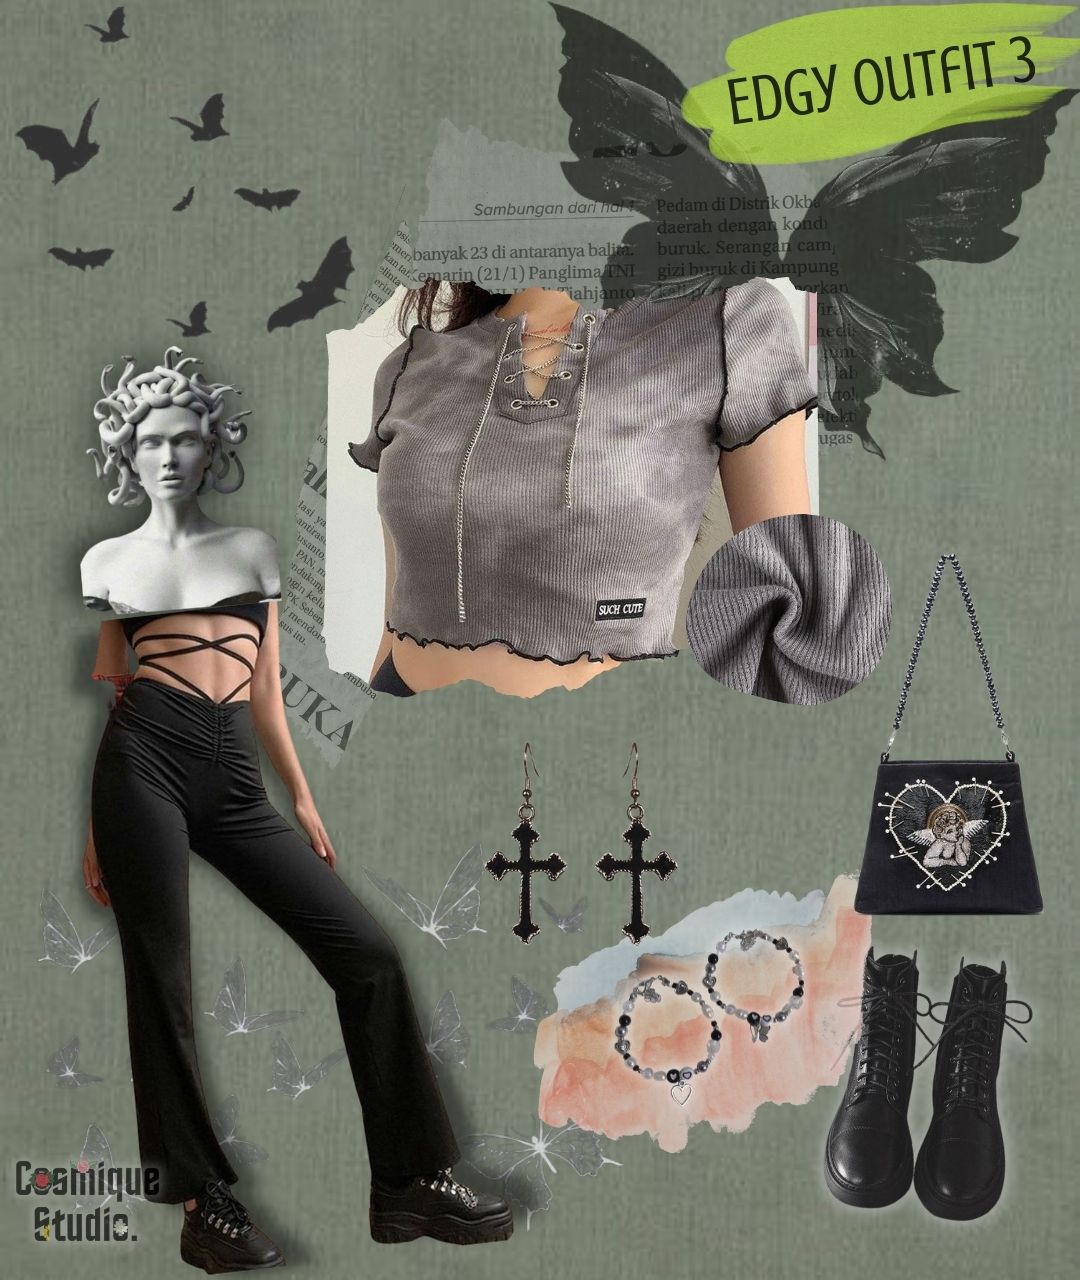 Edgy outfit inspiration collage with grunge aesthetic ankle boots, edgy aesthetic tie neck regular fit grey crop top and edgy high waist bandage pants